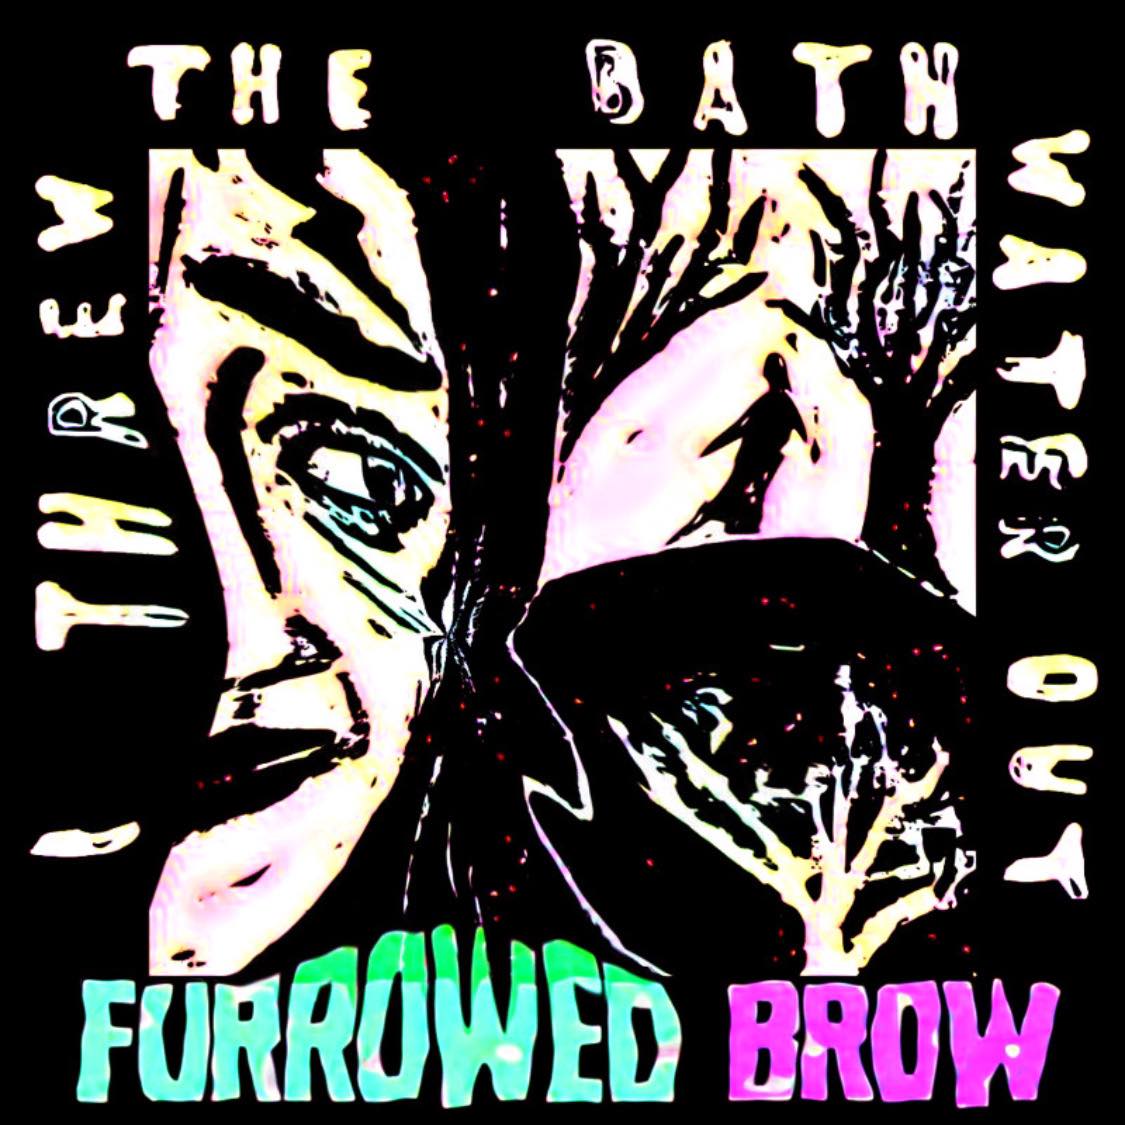 New single I THREW THE BATHWATER OUT Out today open.spotify.com/track/7fLml7gn…